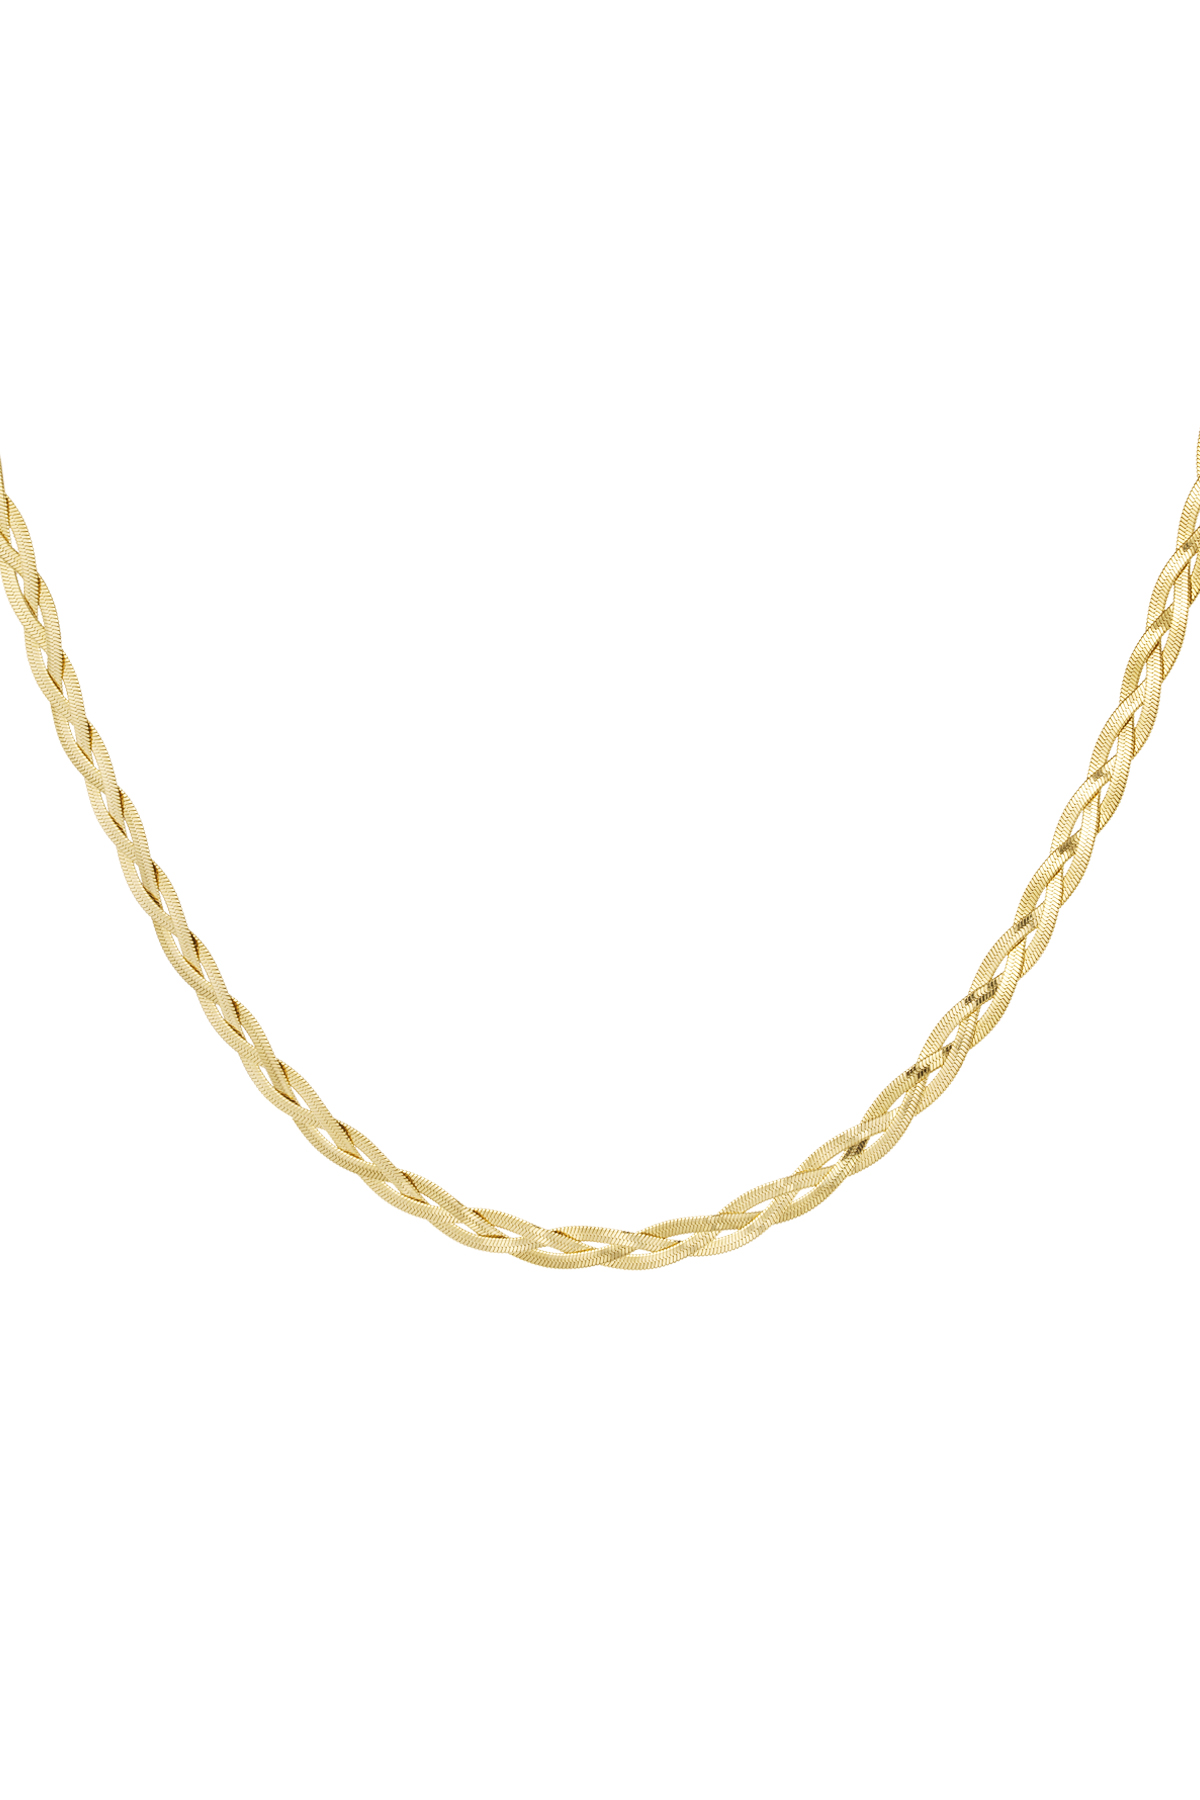 Necklace braided - gold h5 